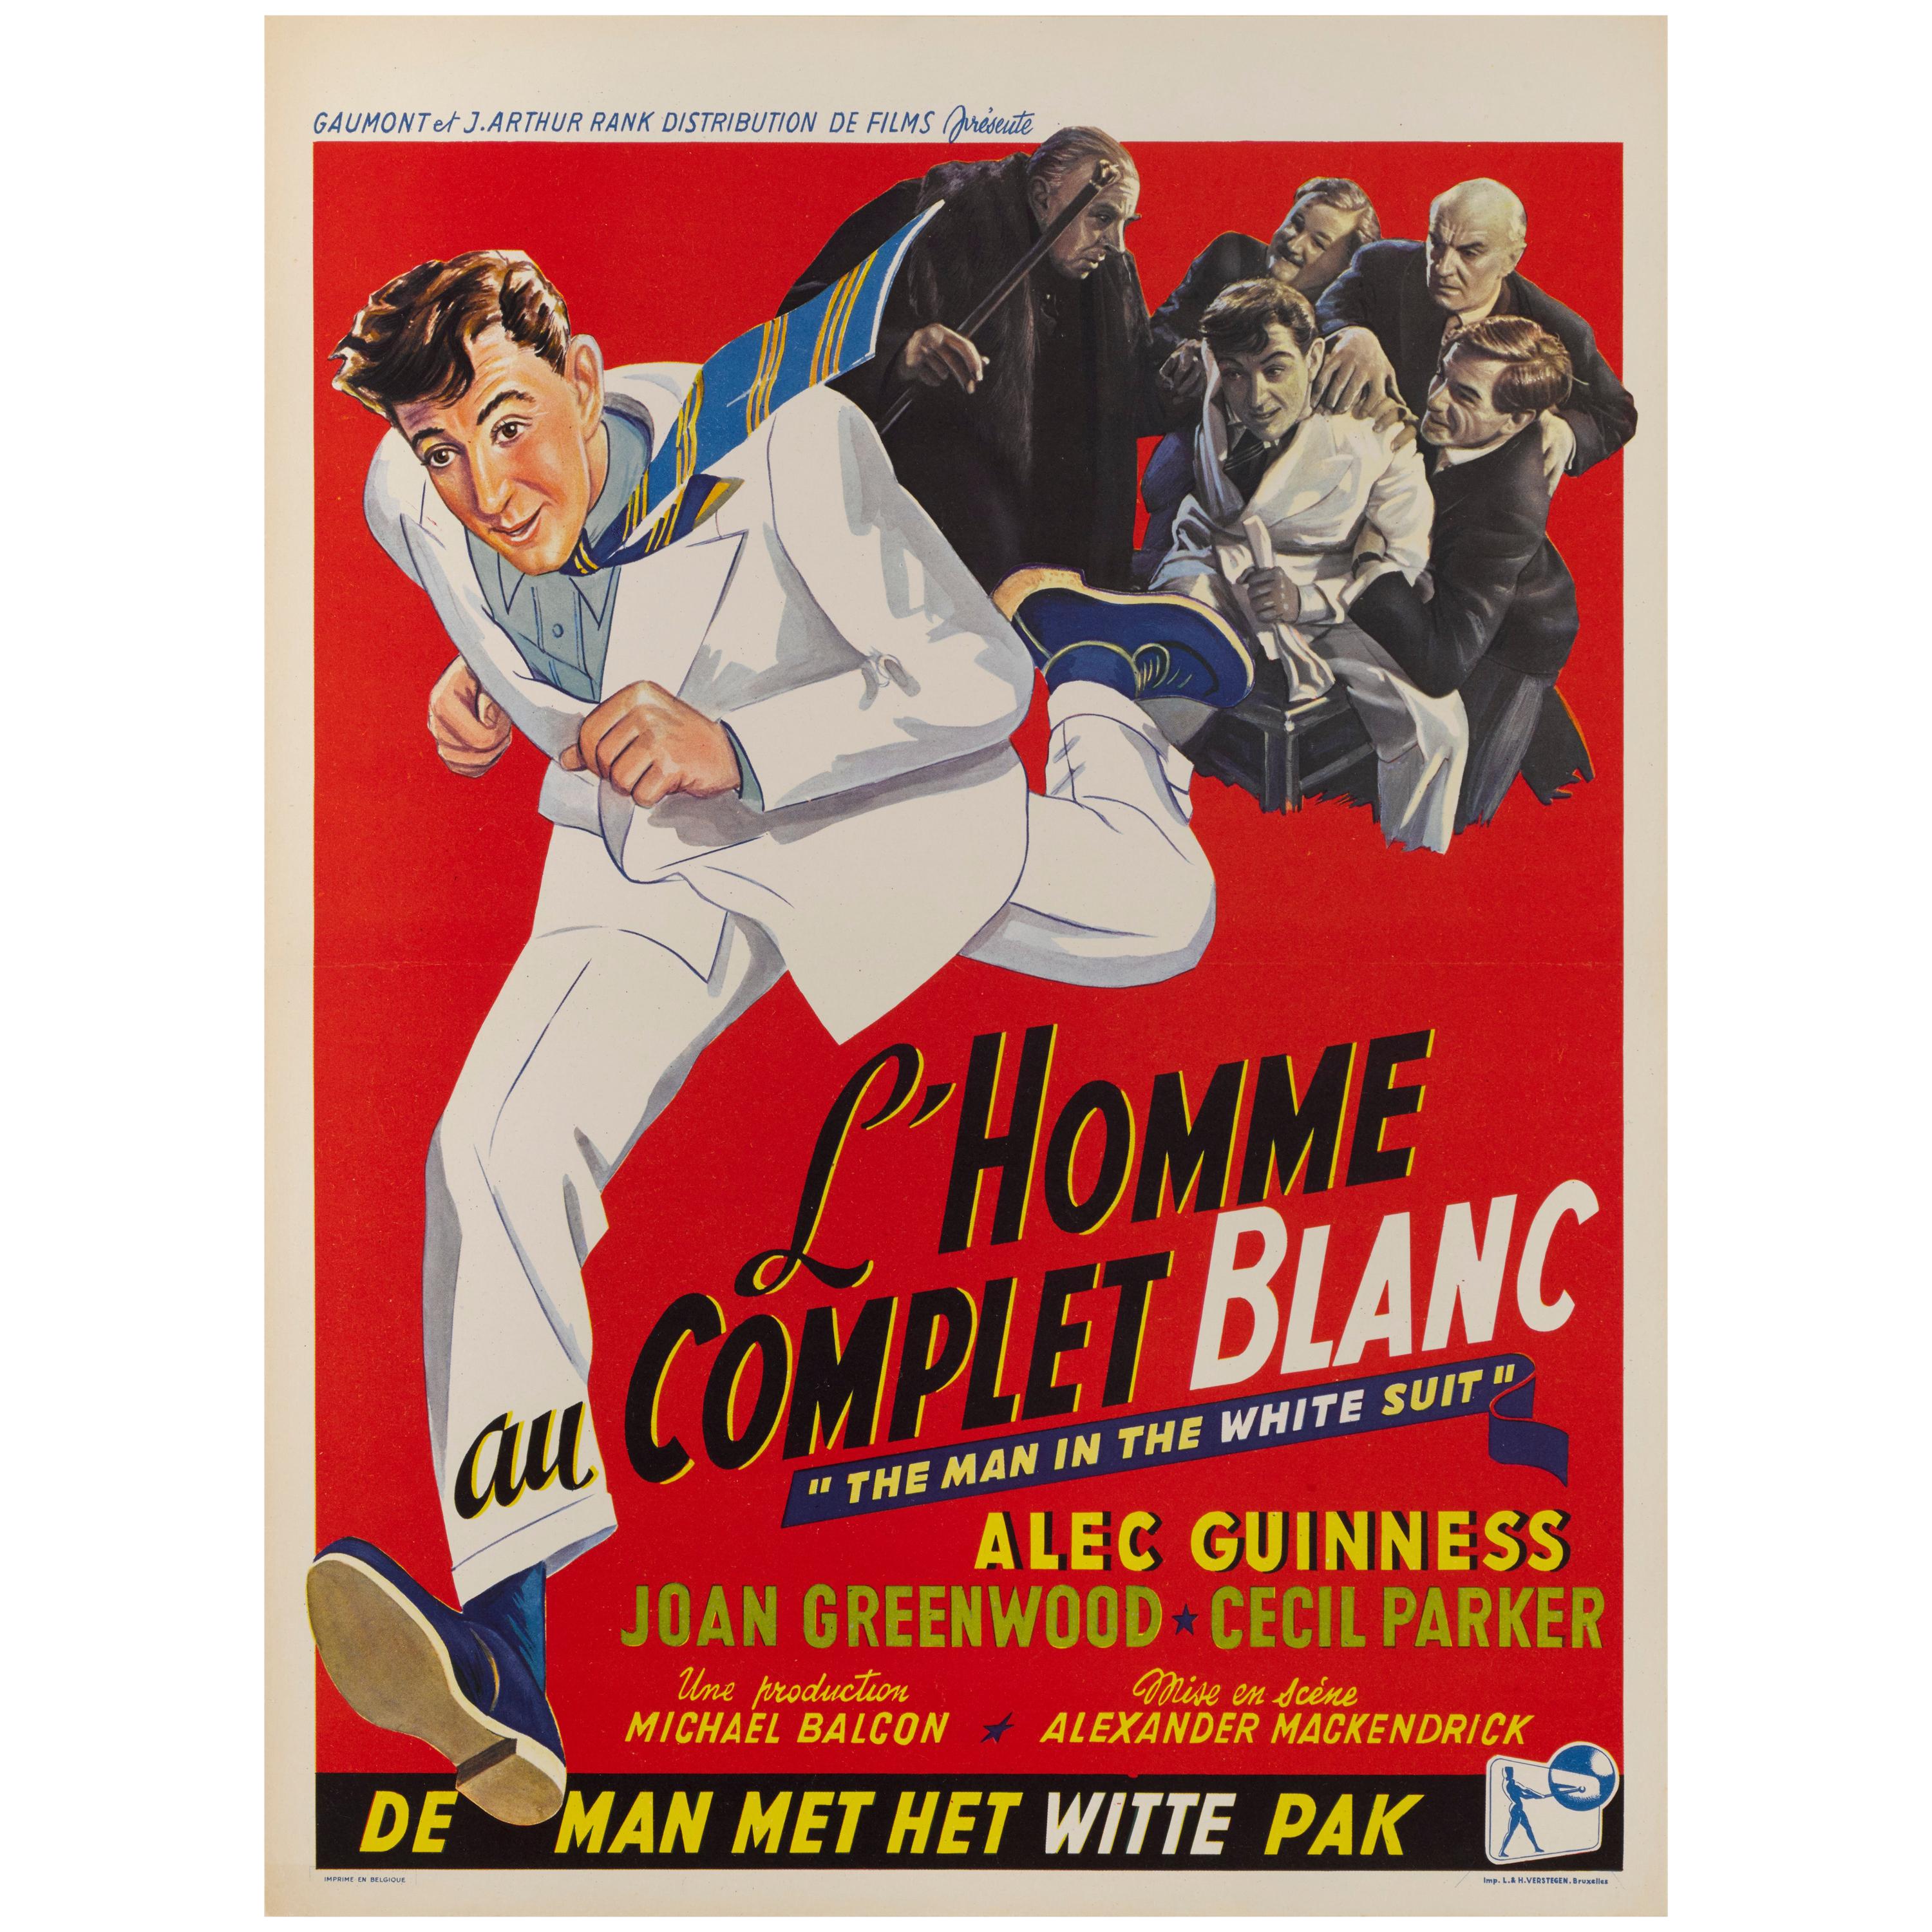 The Man in the White Suit  / L' Homme au Complet Blanc